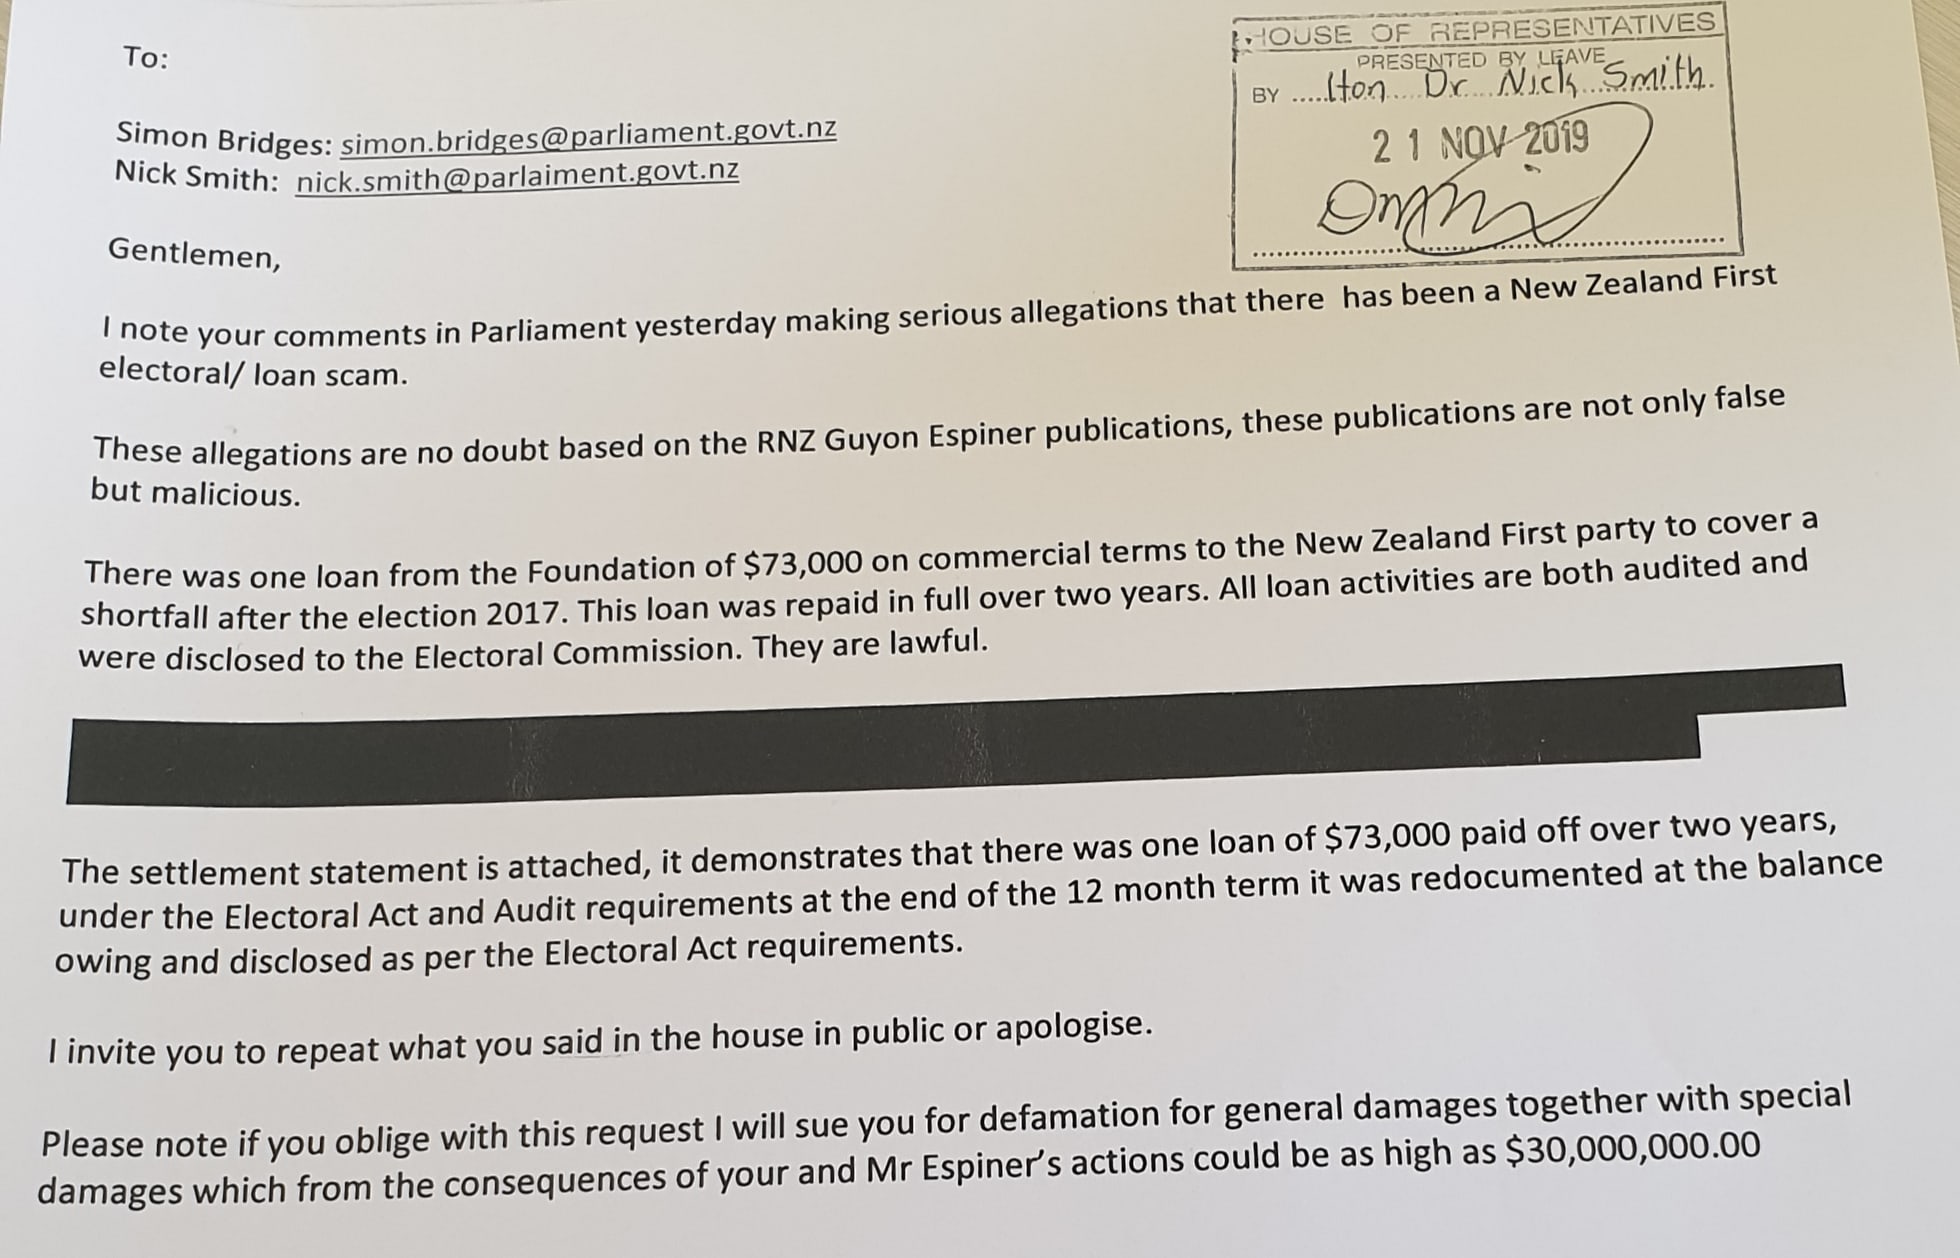 Letter from Brian Henry sent to National MP Nick Smith and leader Simon Bridges.